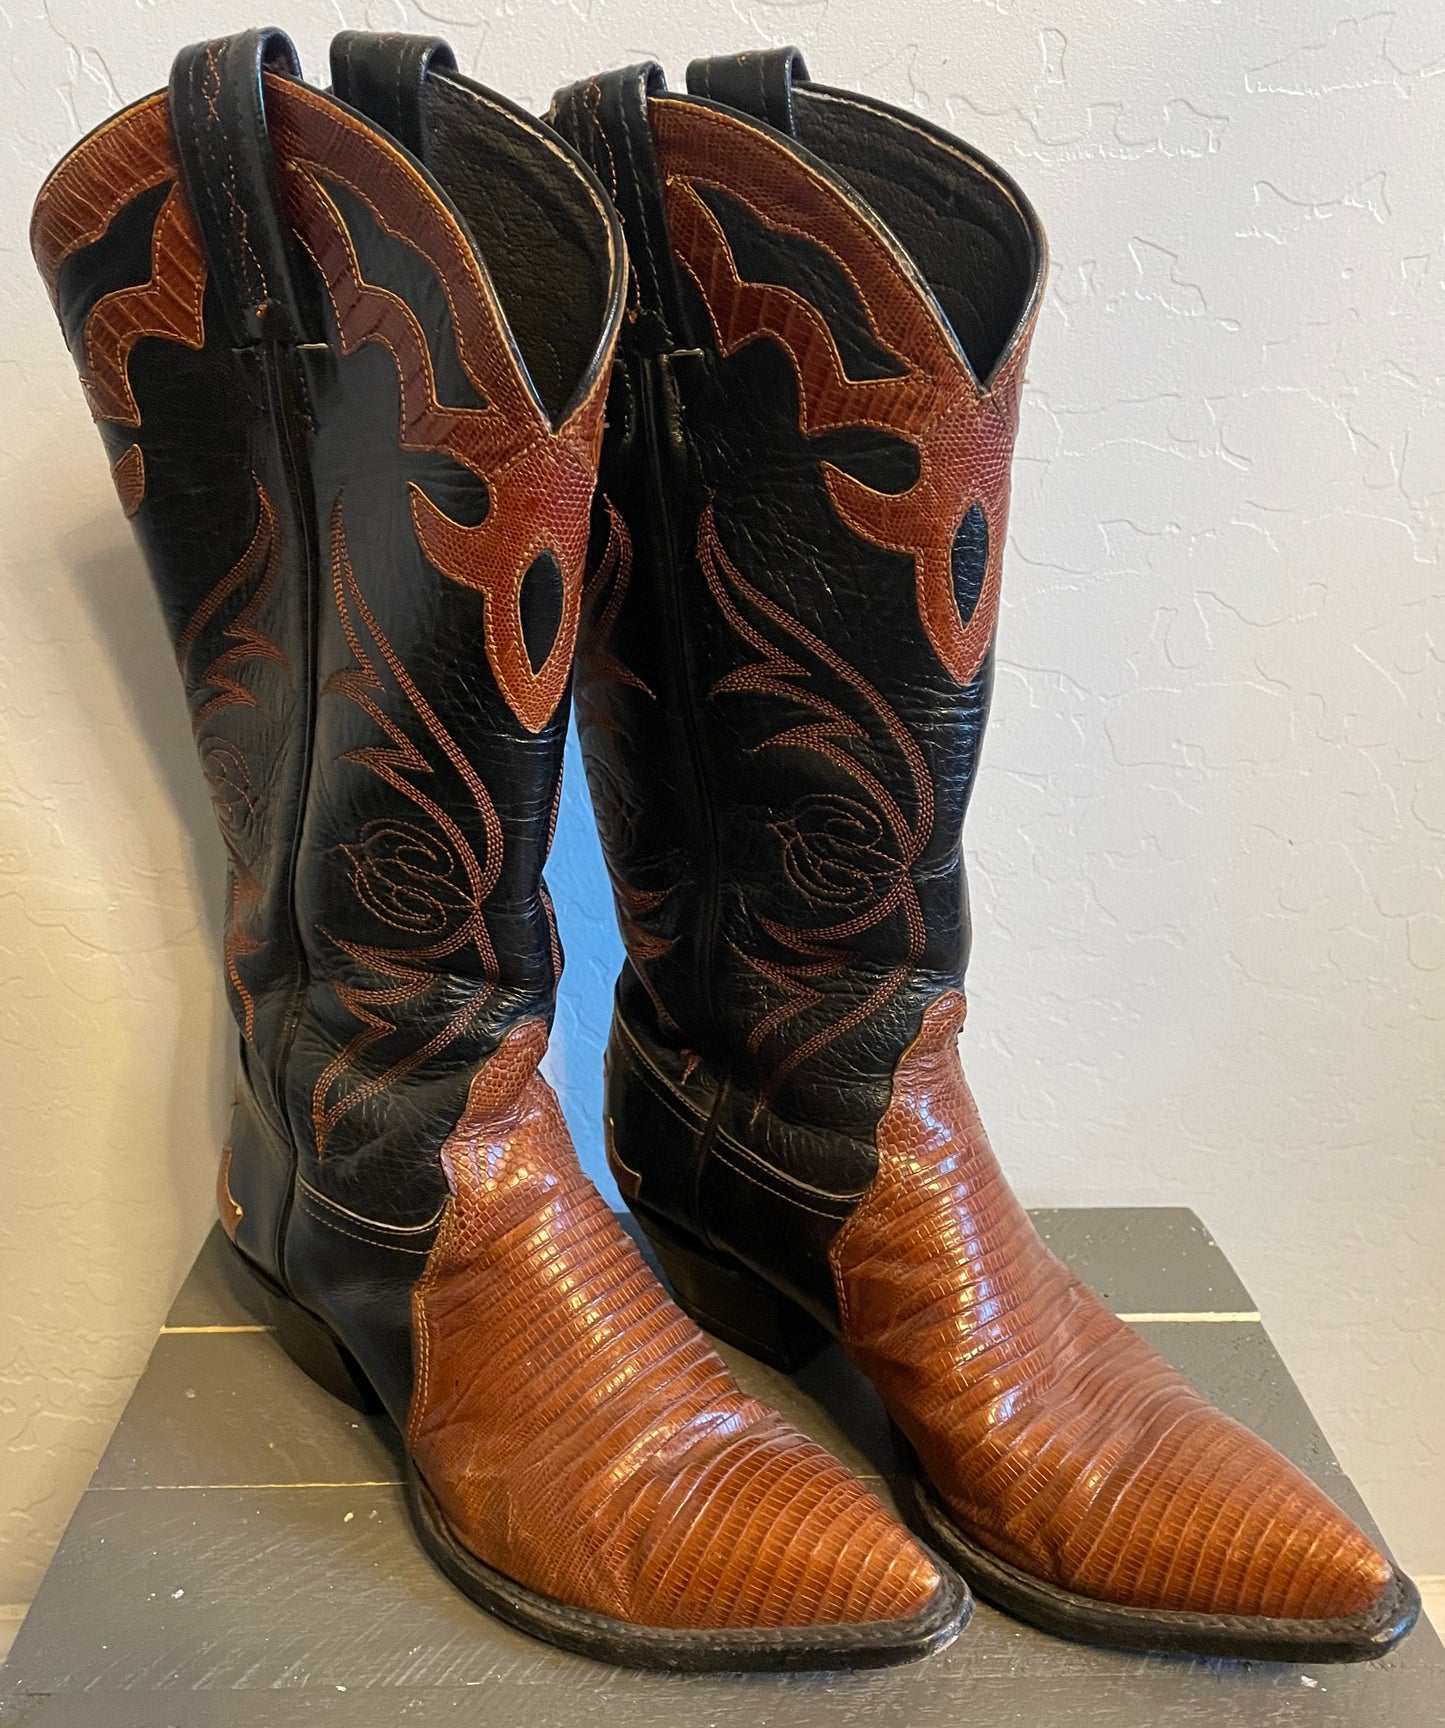 Vintage Tony Lama Black & Brown Cowgirl Boots